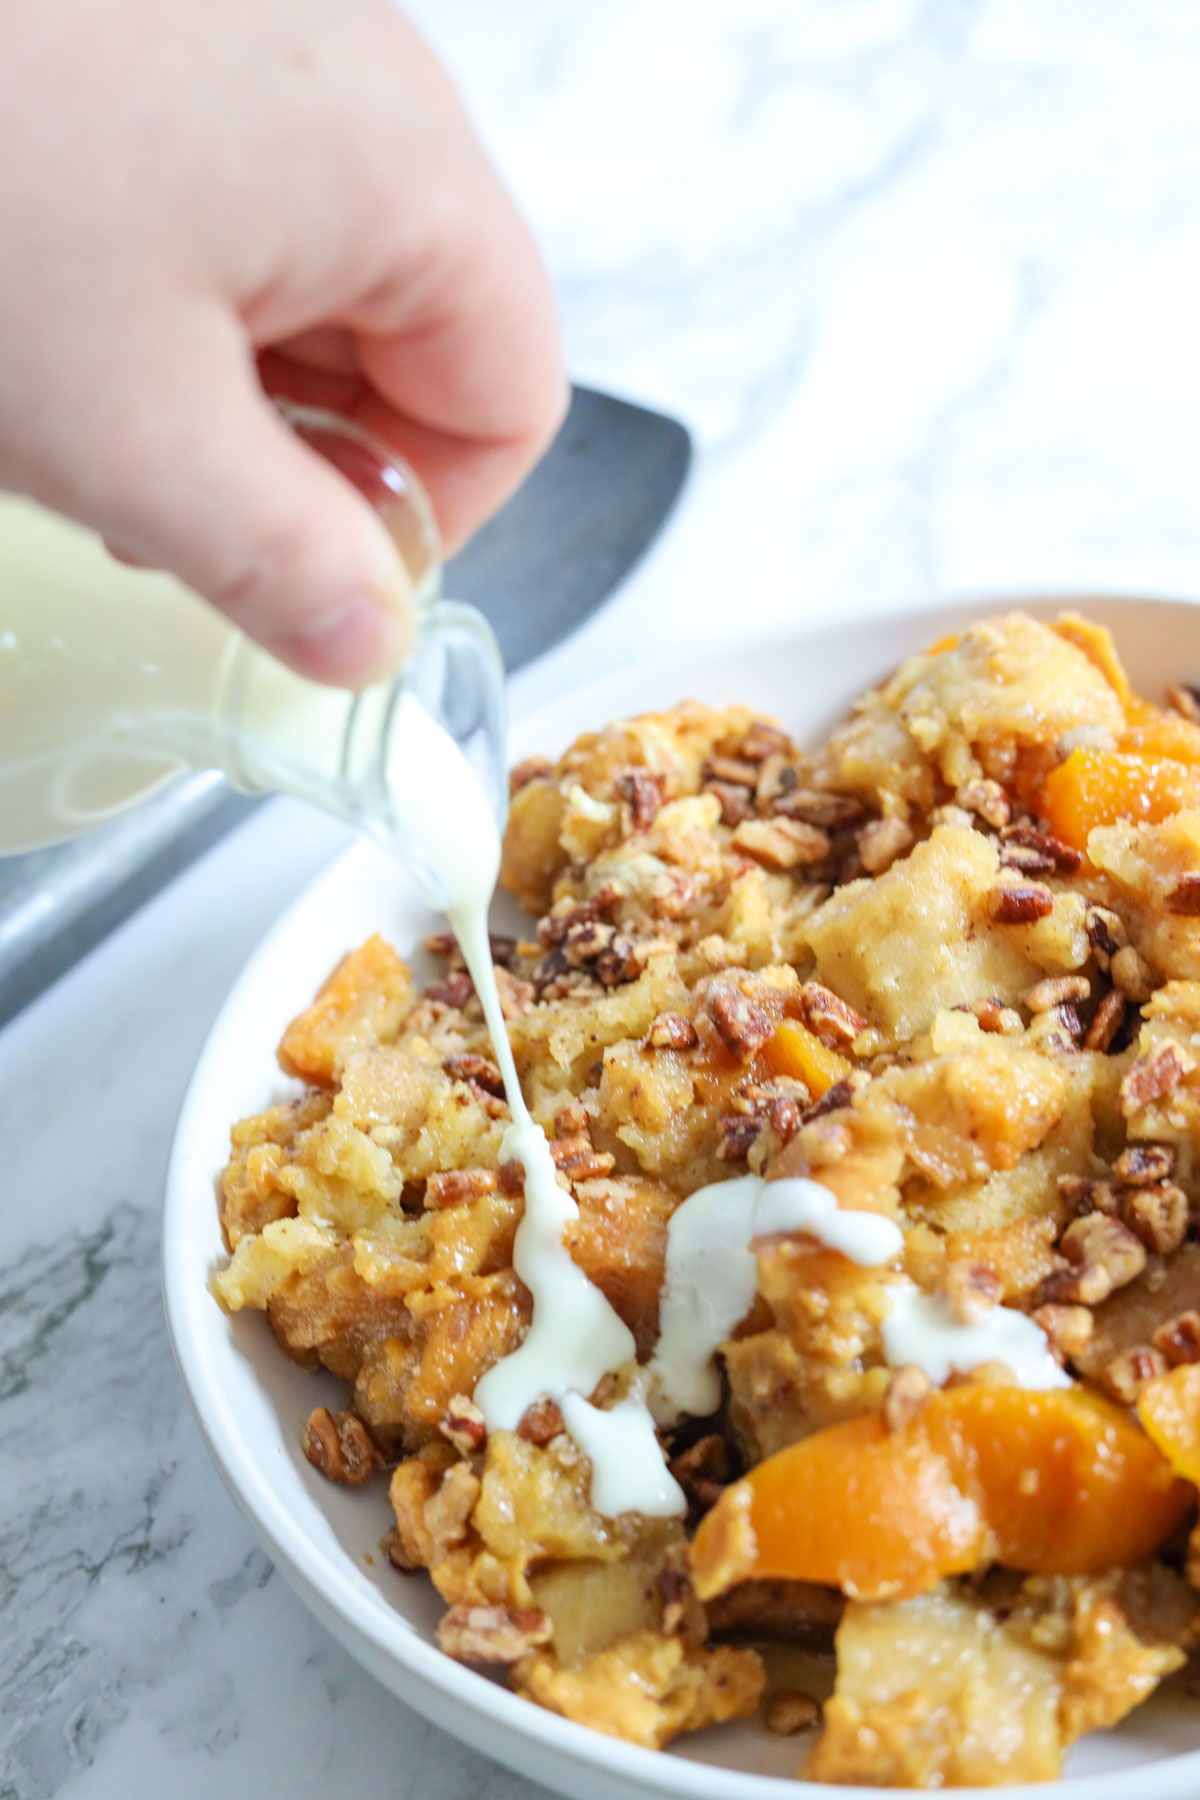 drizzled icing on peach bread pudding